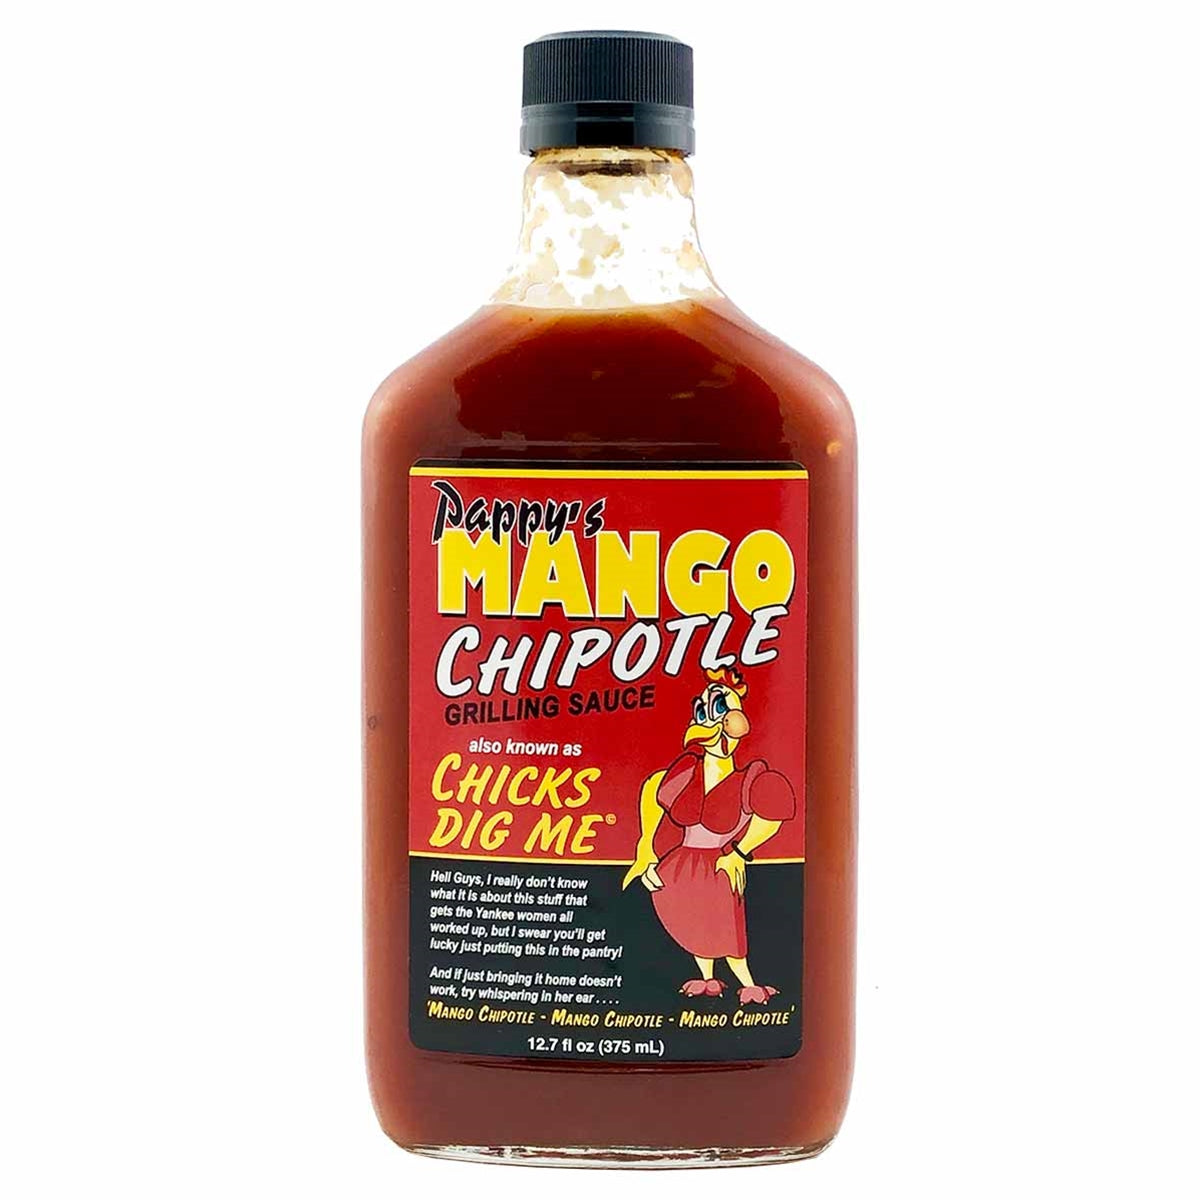 Hot Sauce Pappys Mango Chipotle Grilling Chicks Dig Me! 12.7 oz Large Flask Heat 5